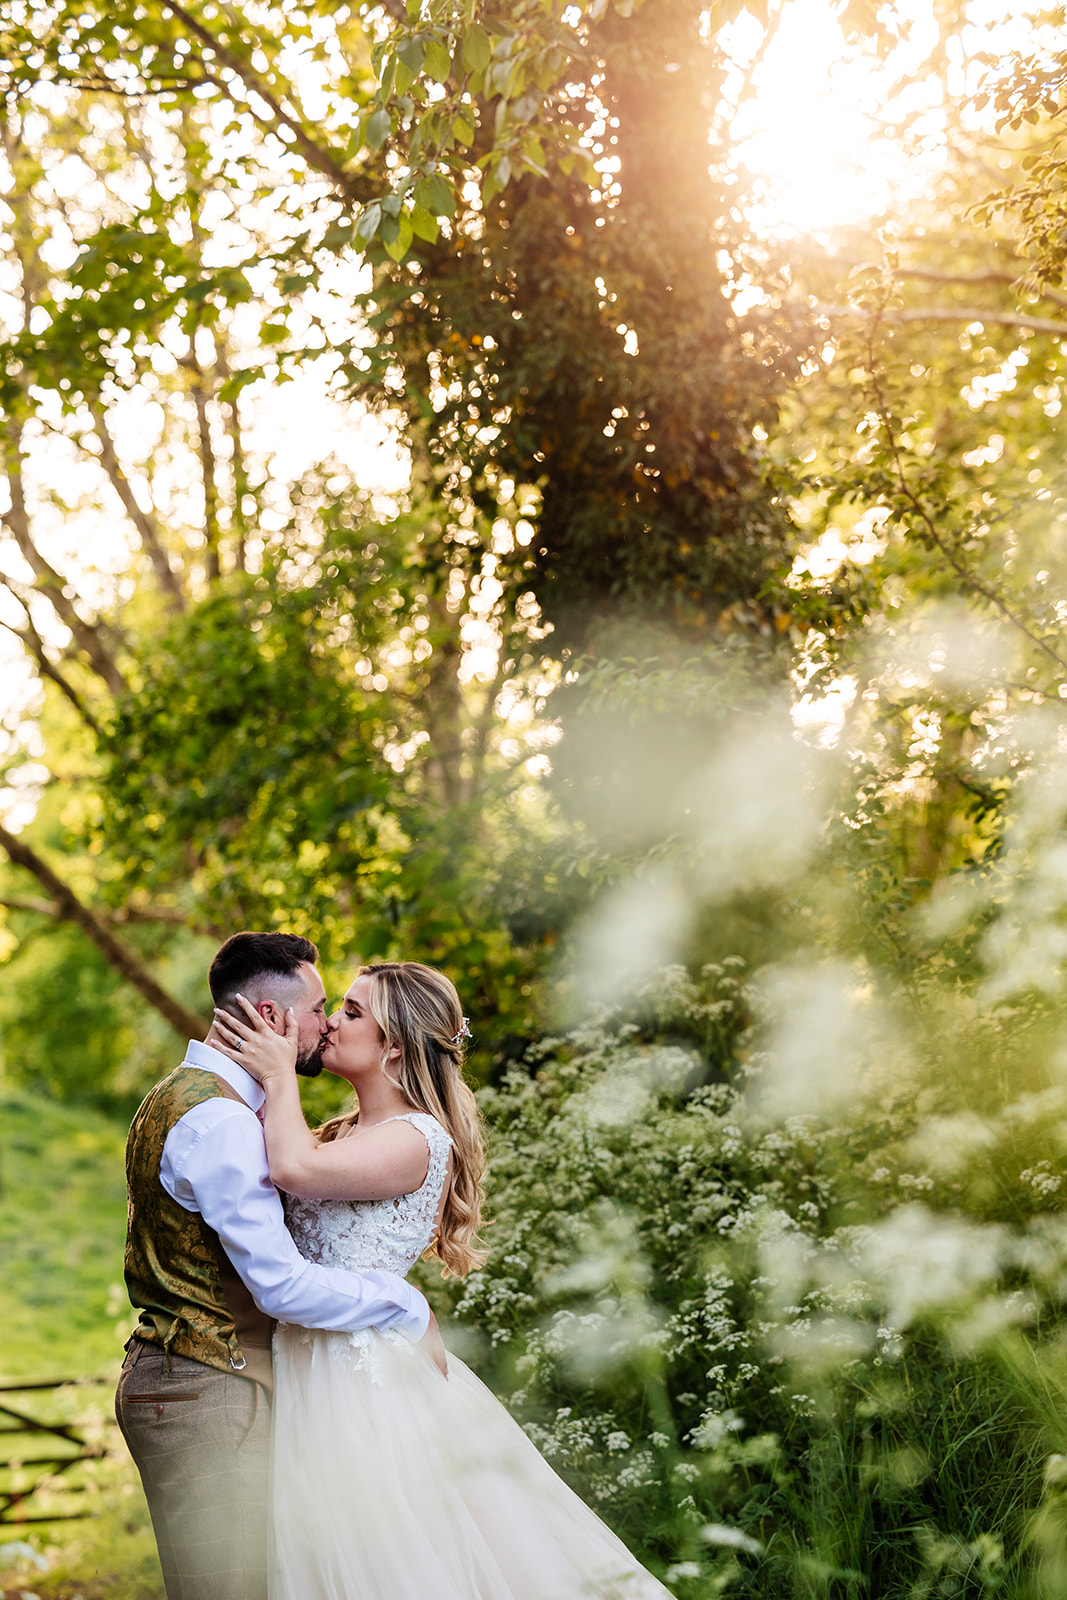 Couple share kiss in forest with white flowers and trees in the background 